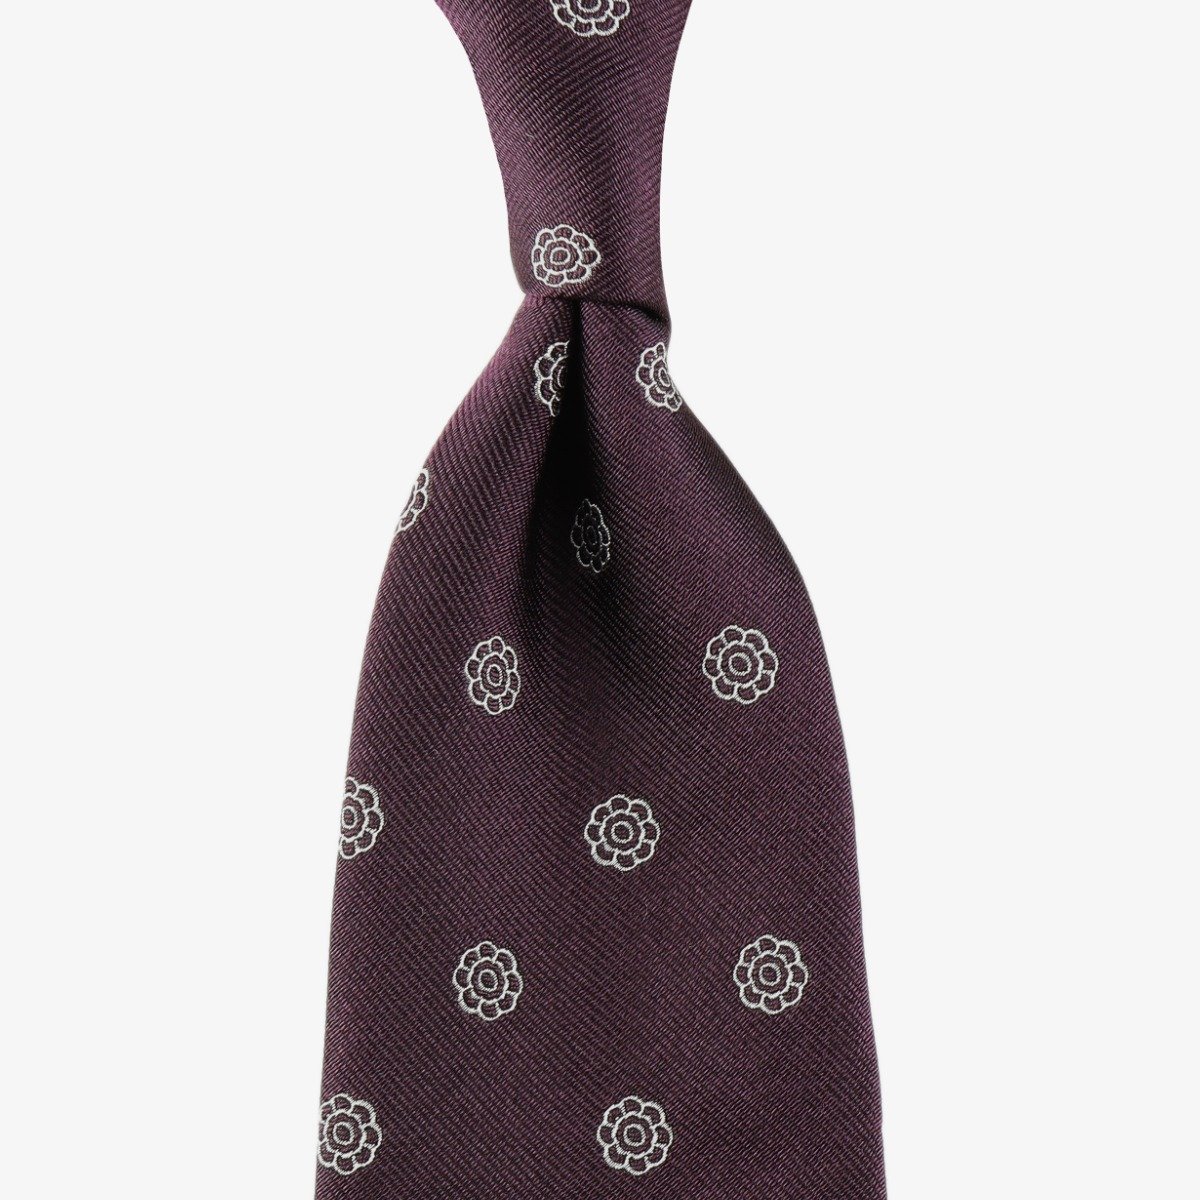 Shibumi Firenze eggplant silk tie with white floral pattern